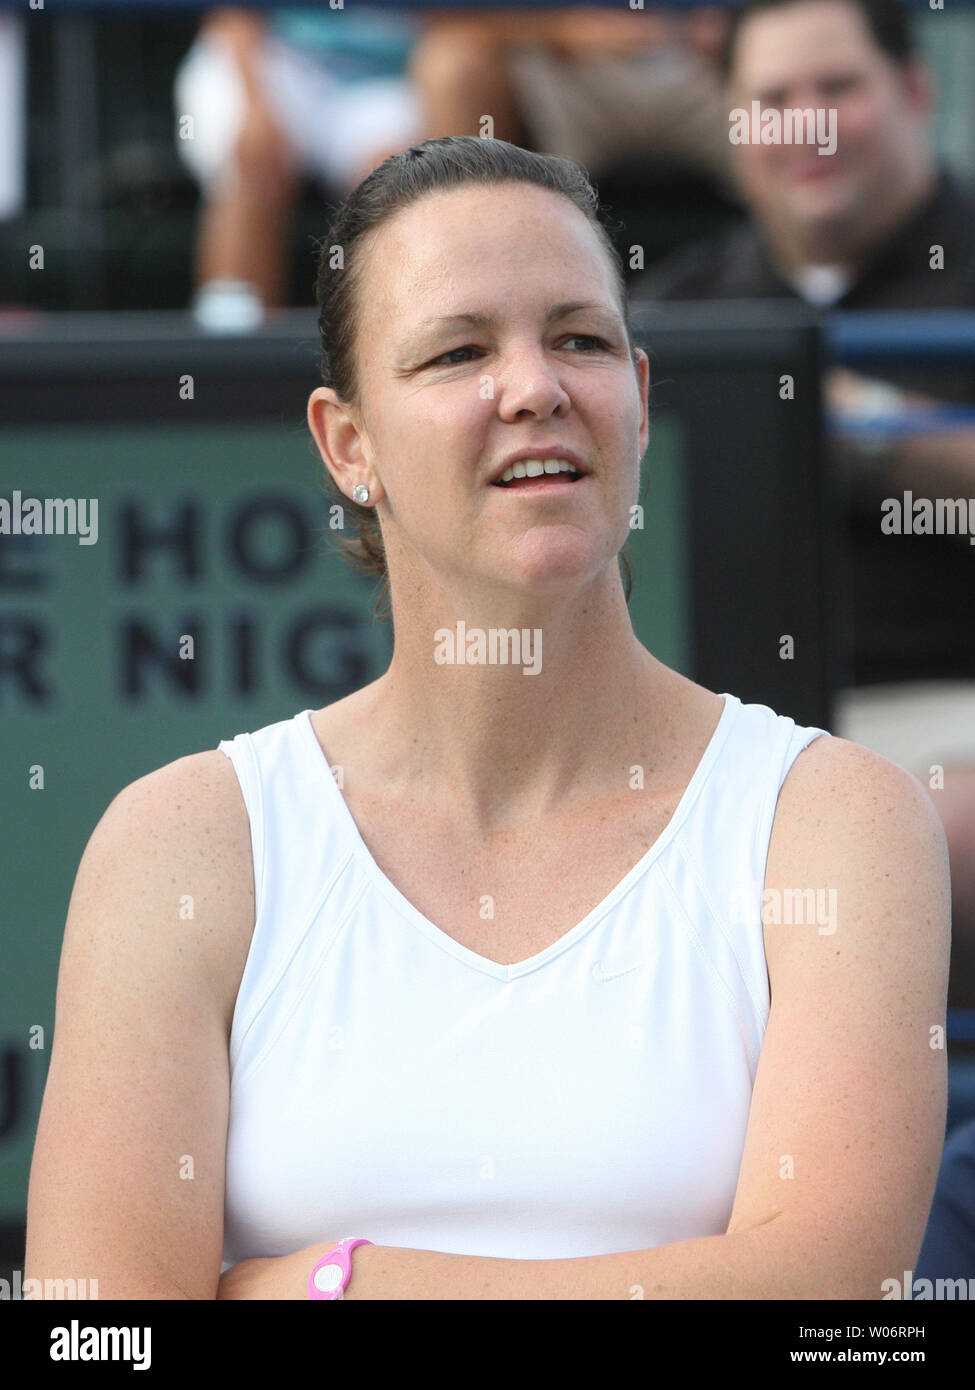 Three-time Grand Slam singles champion  and former world No.1 women's tennis player Lindsay Davenport listens to introductions as a member of the St. Louis Aces during their match against the Sacramento Capitals in World Team Tennis matches at the Dwight Davis Tennis Center in St. Louis on July 7, 2010.  UPI/Bill Greenblatt Stock Photo